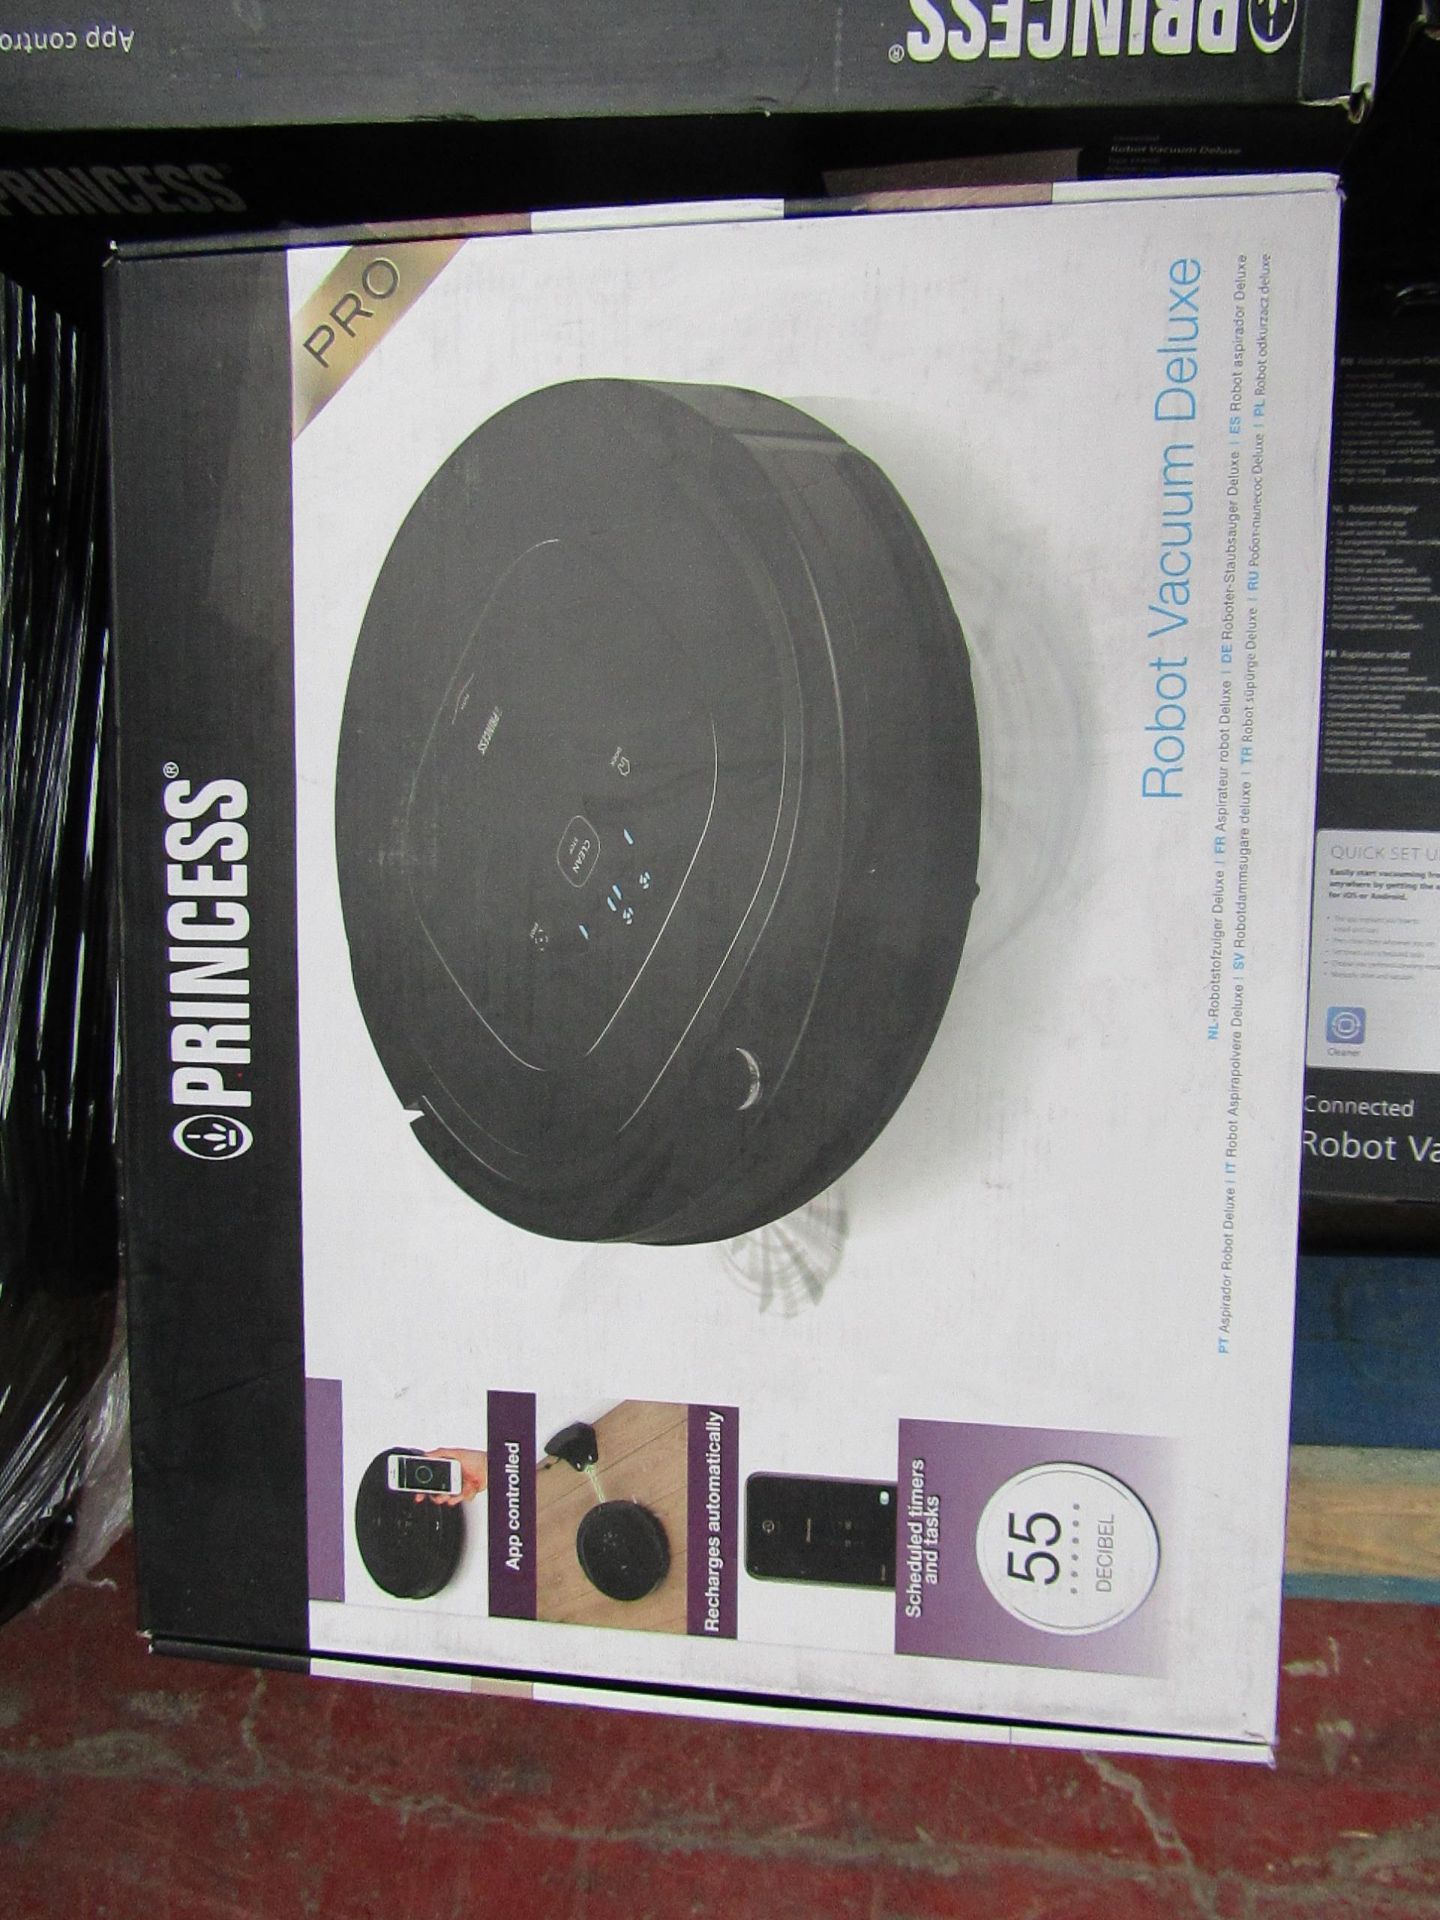 1X PRINCESS PRO ROBOT VACUUM DELUXE, UNCHECKED & BOXED, RRP 219.99 AT ARGOS.